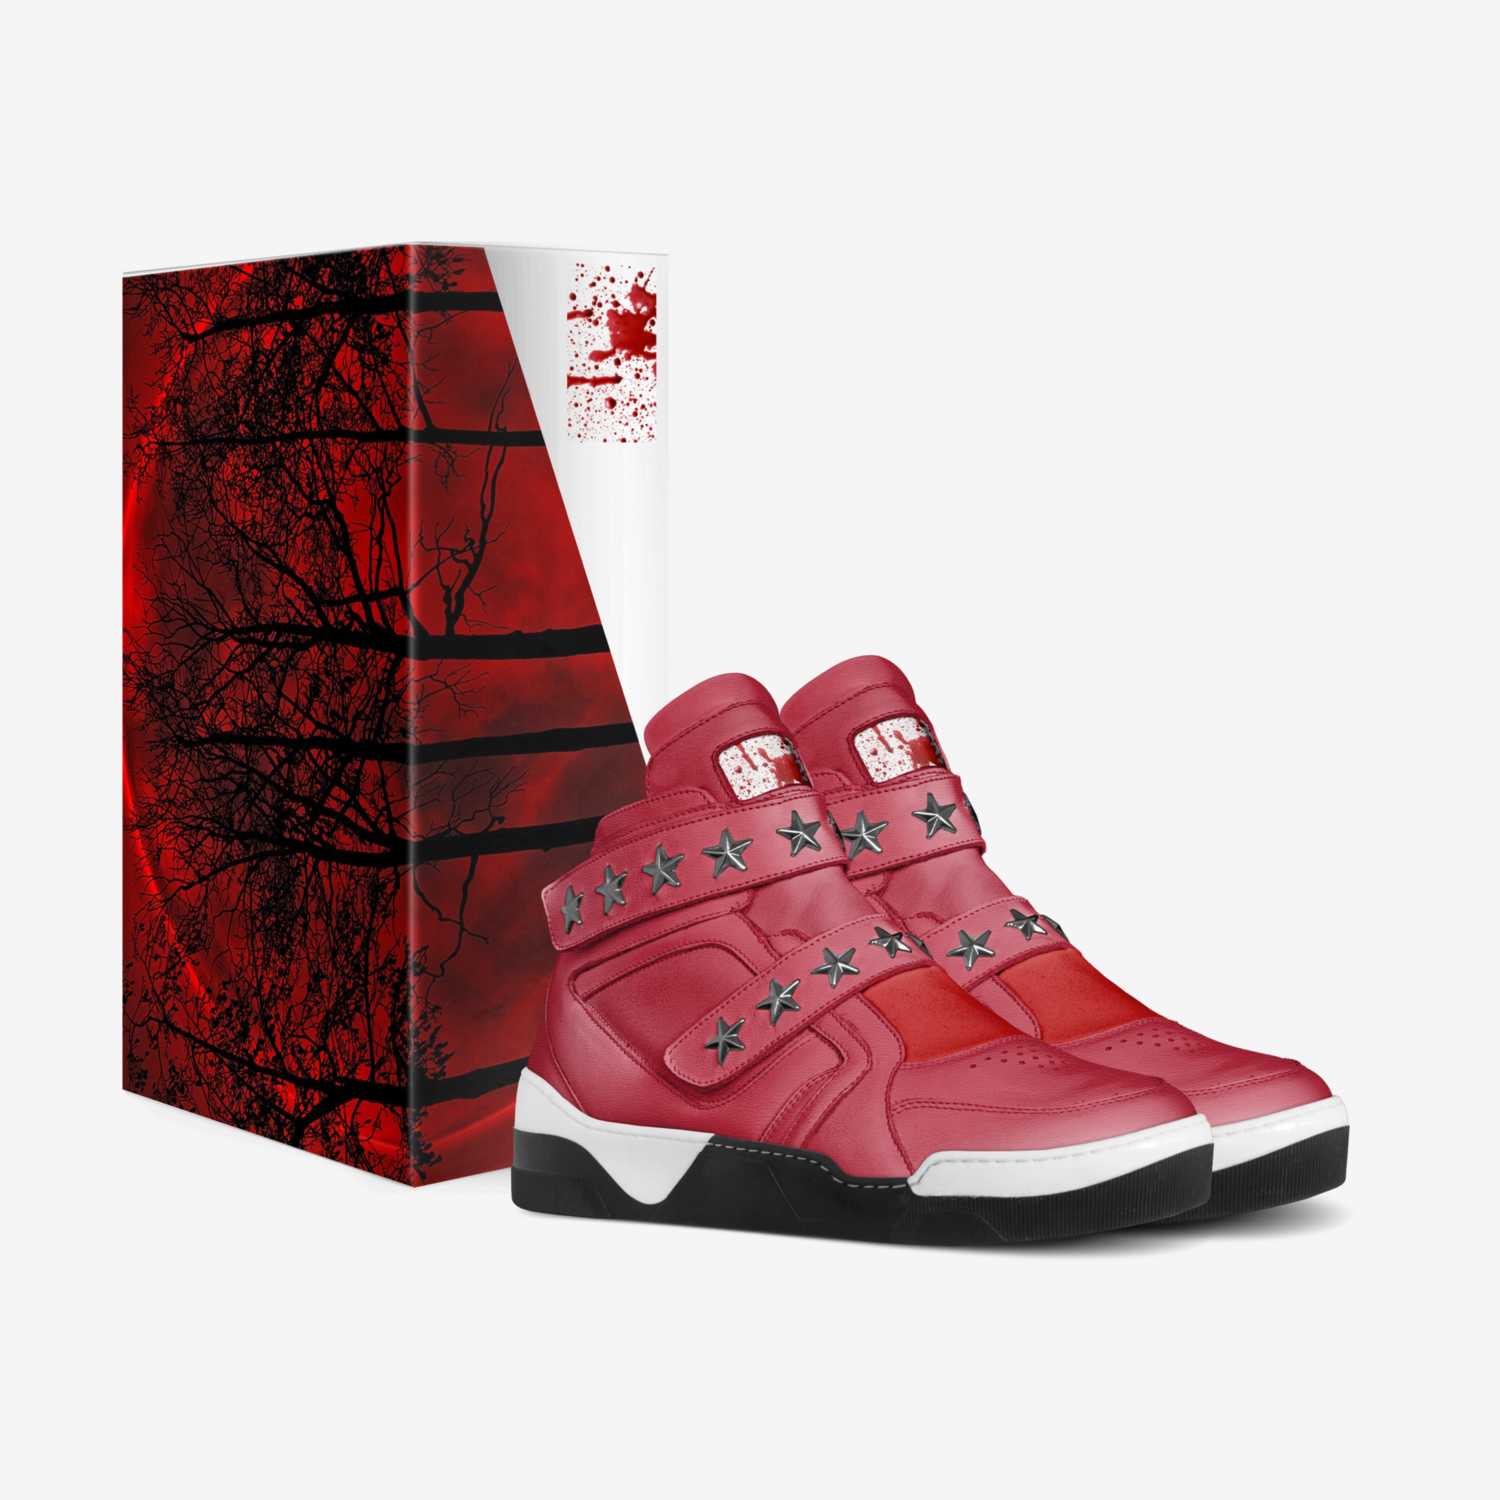 Bloods custom made in Italy shoes by Darrius U Will Get Sued For Taking My Ideas Fair Warning | Box view